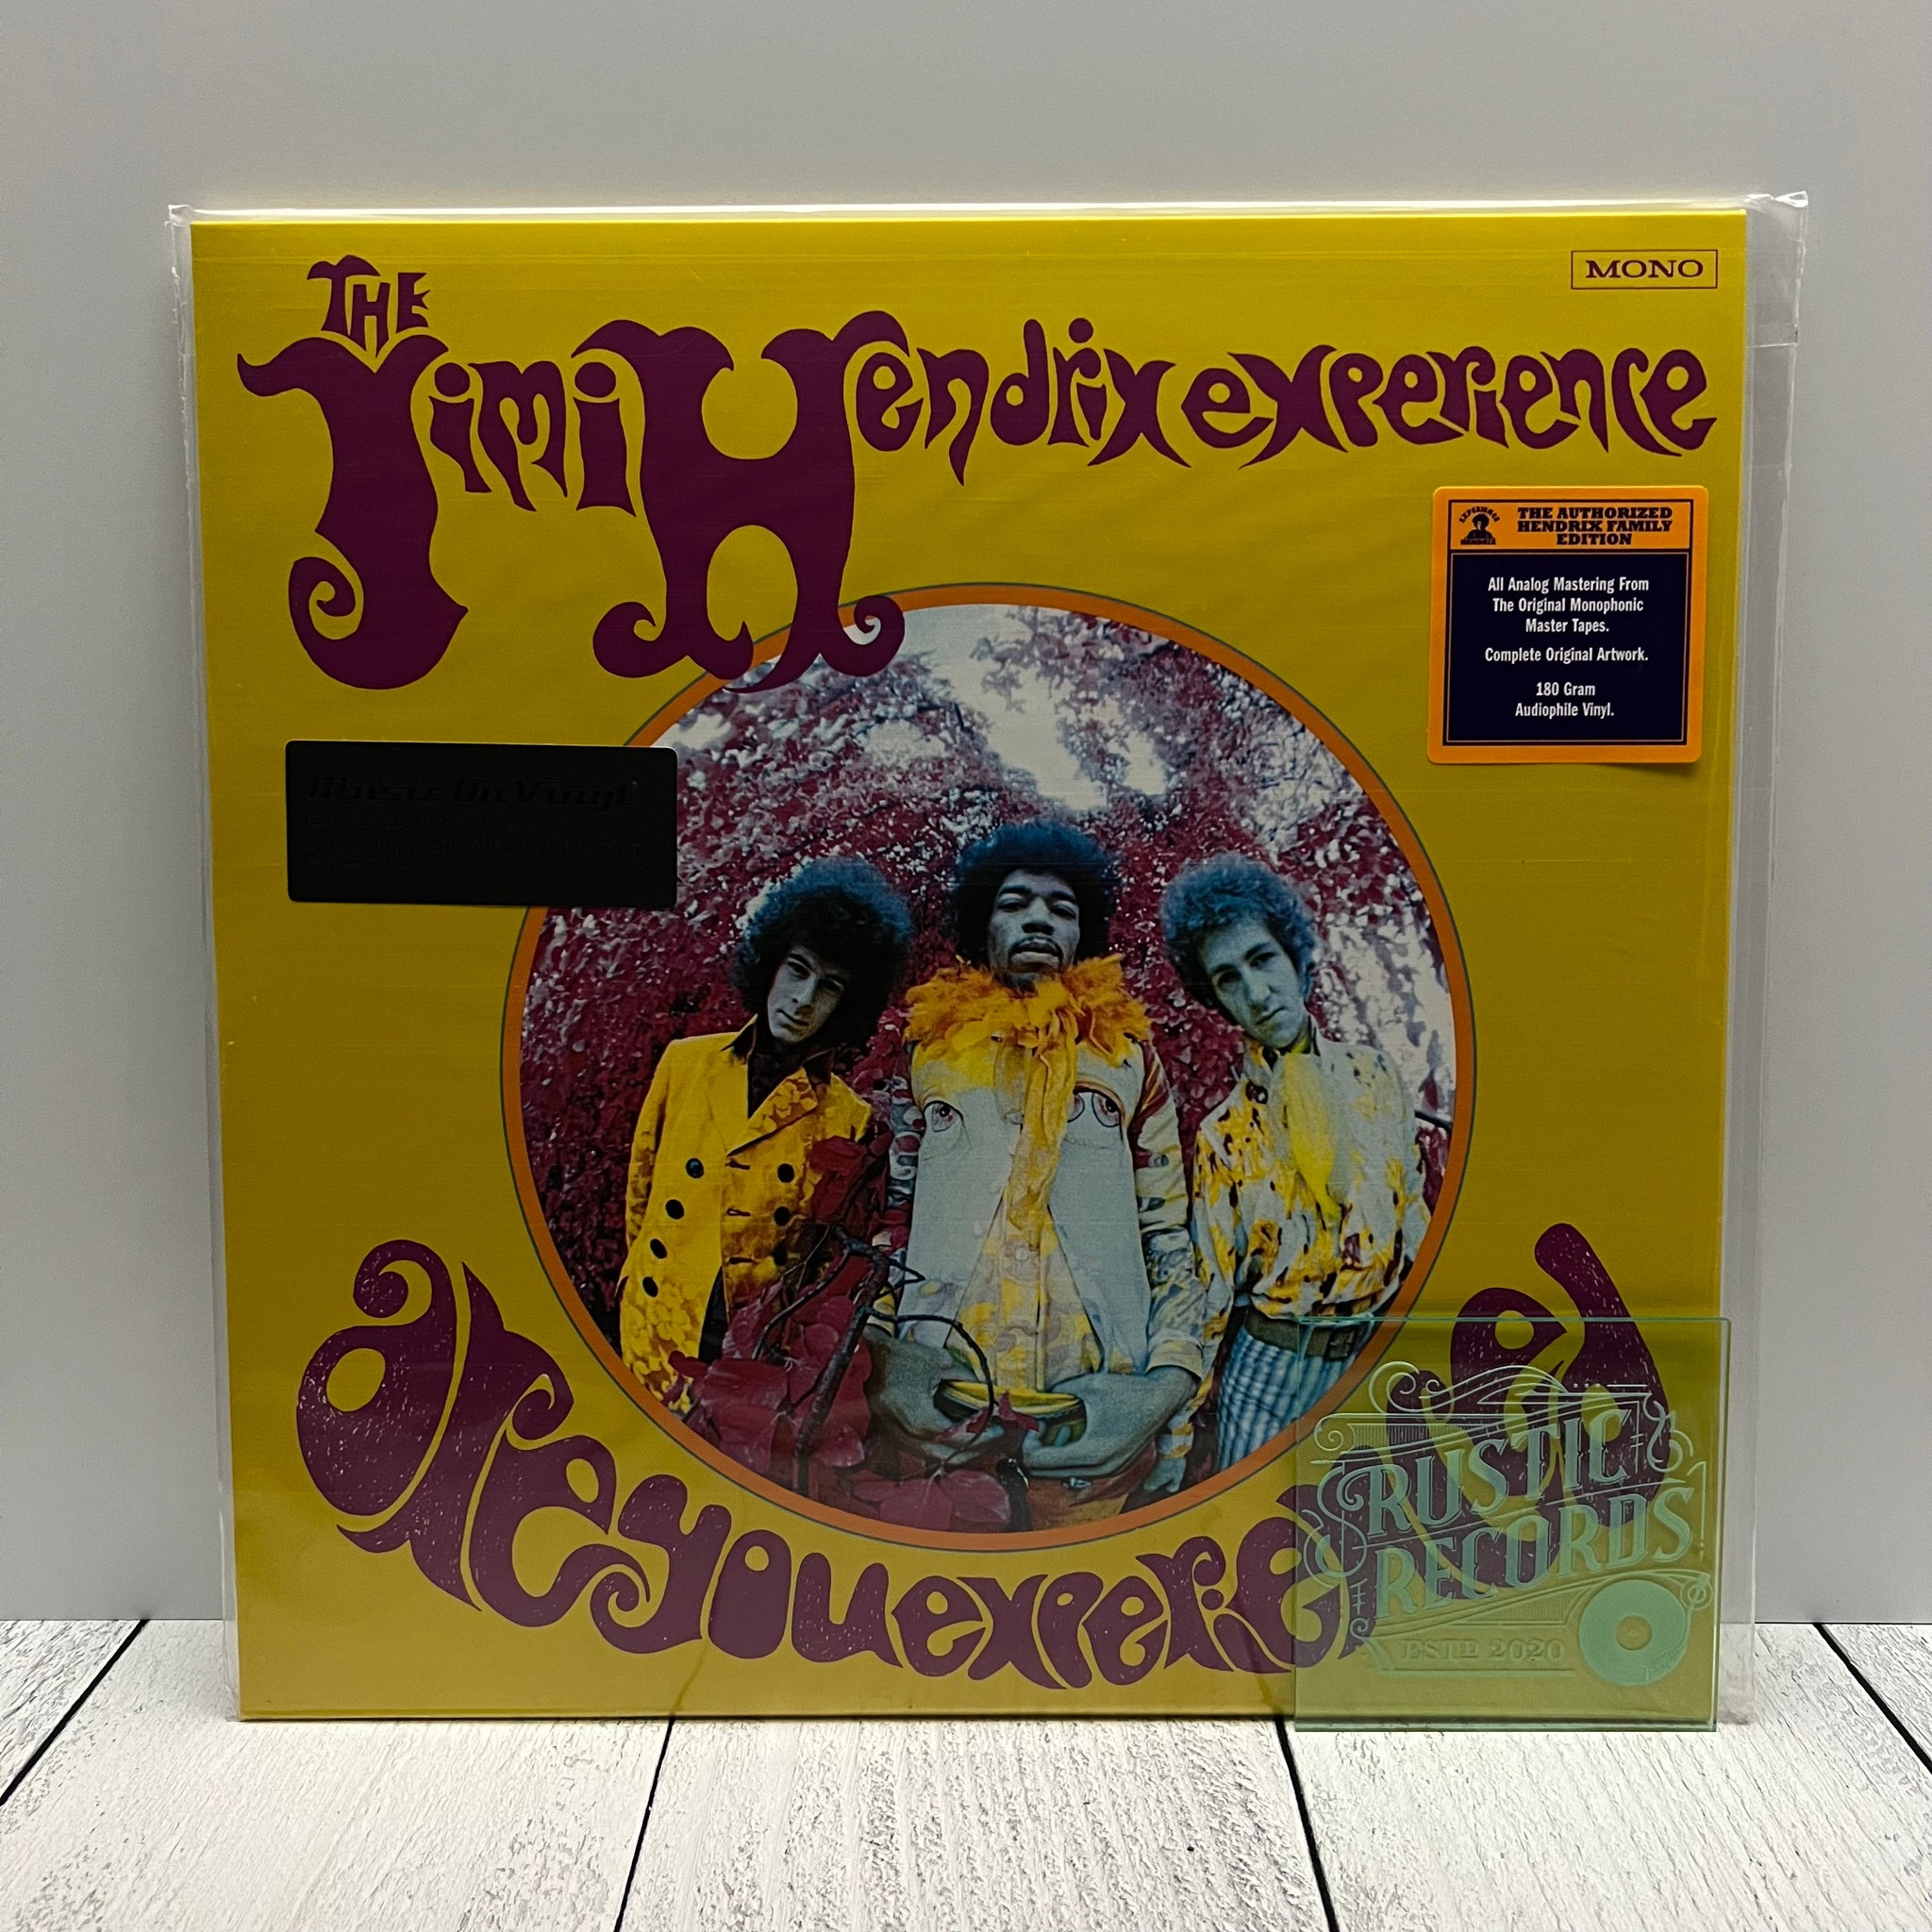 The Jimi Hendrix Experience - Are You Experienced (Music On Vinyl